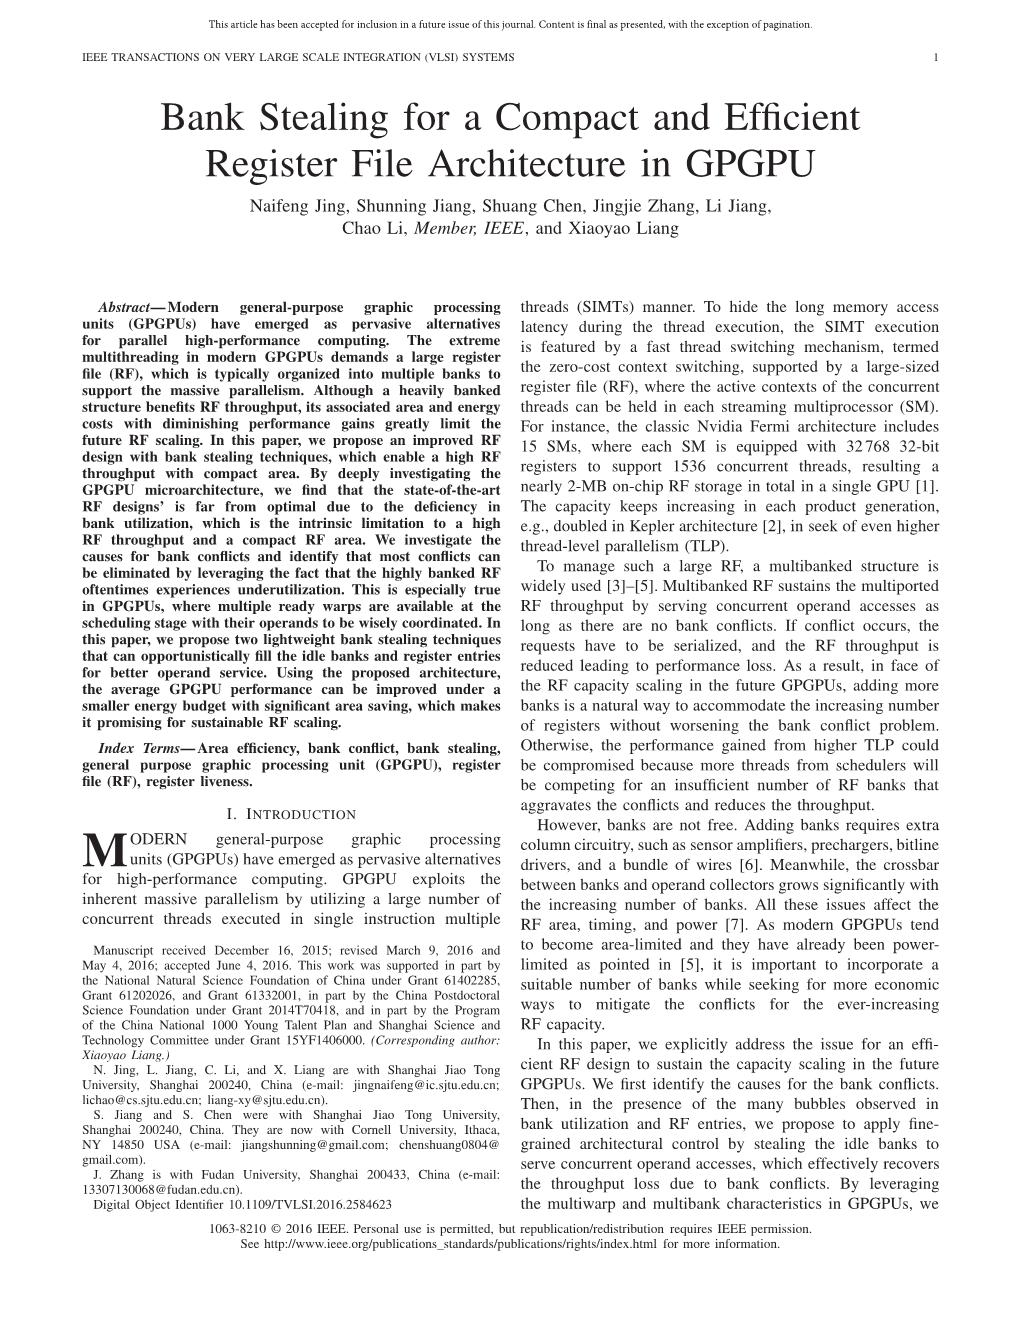 Bank Stealing for a Compact and Efficient Register File Architecture in Gpgpu 3